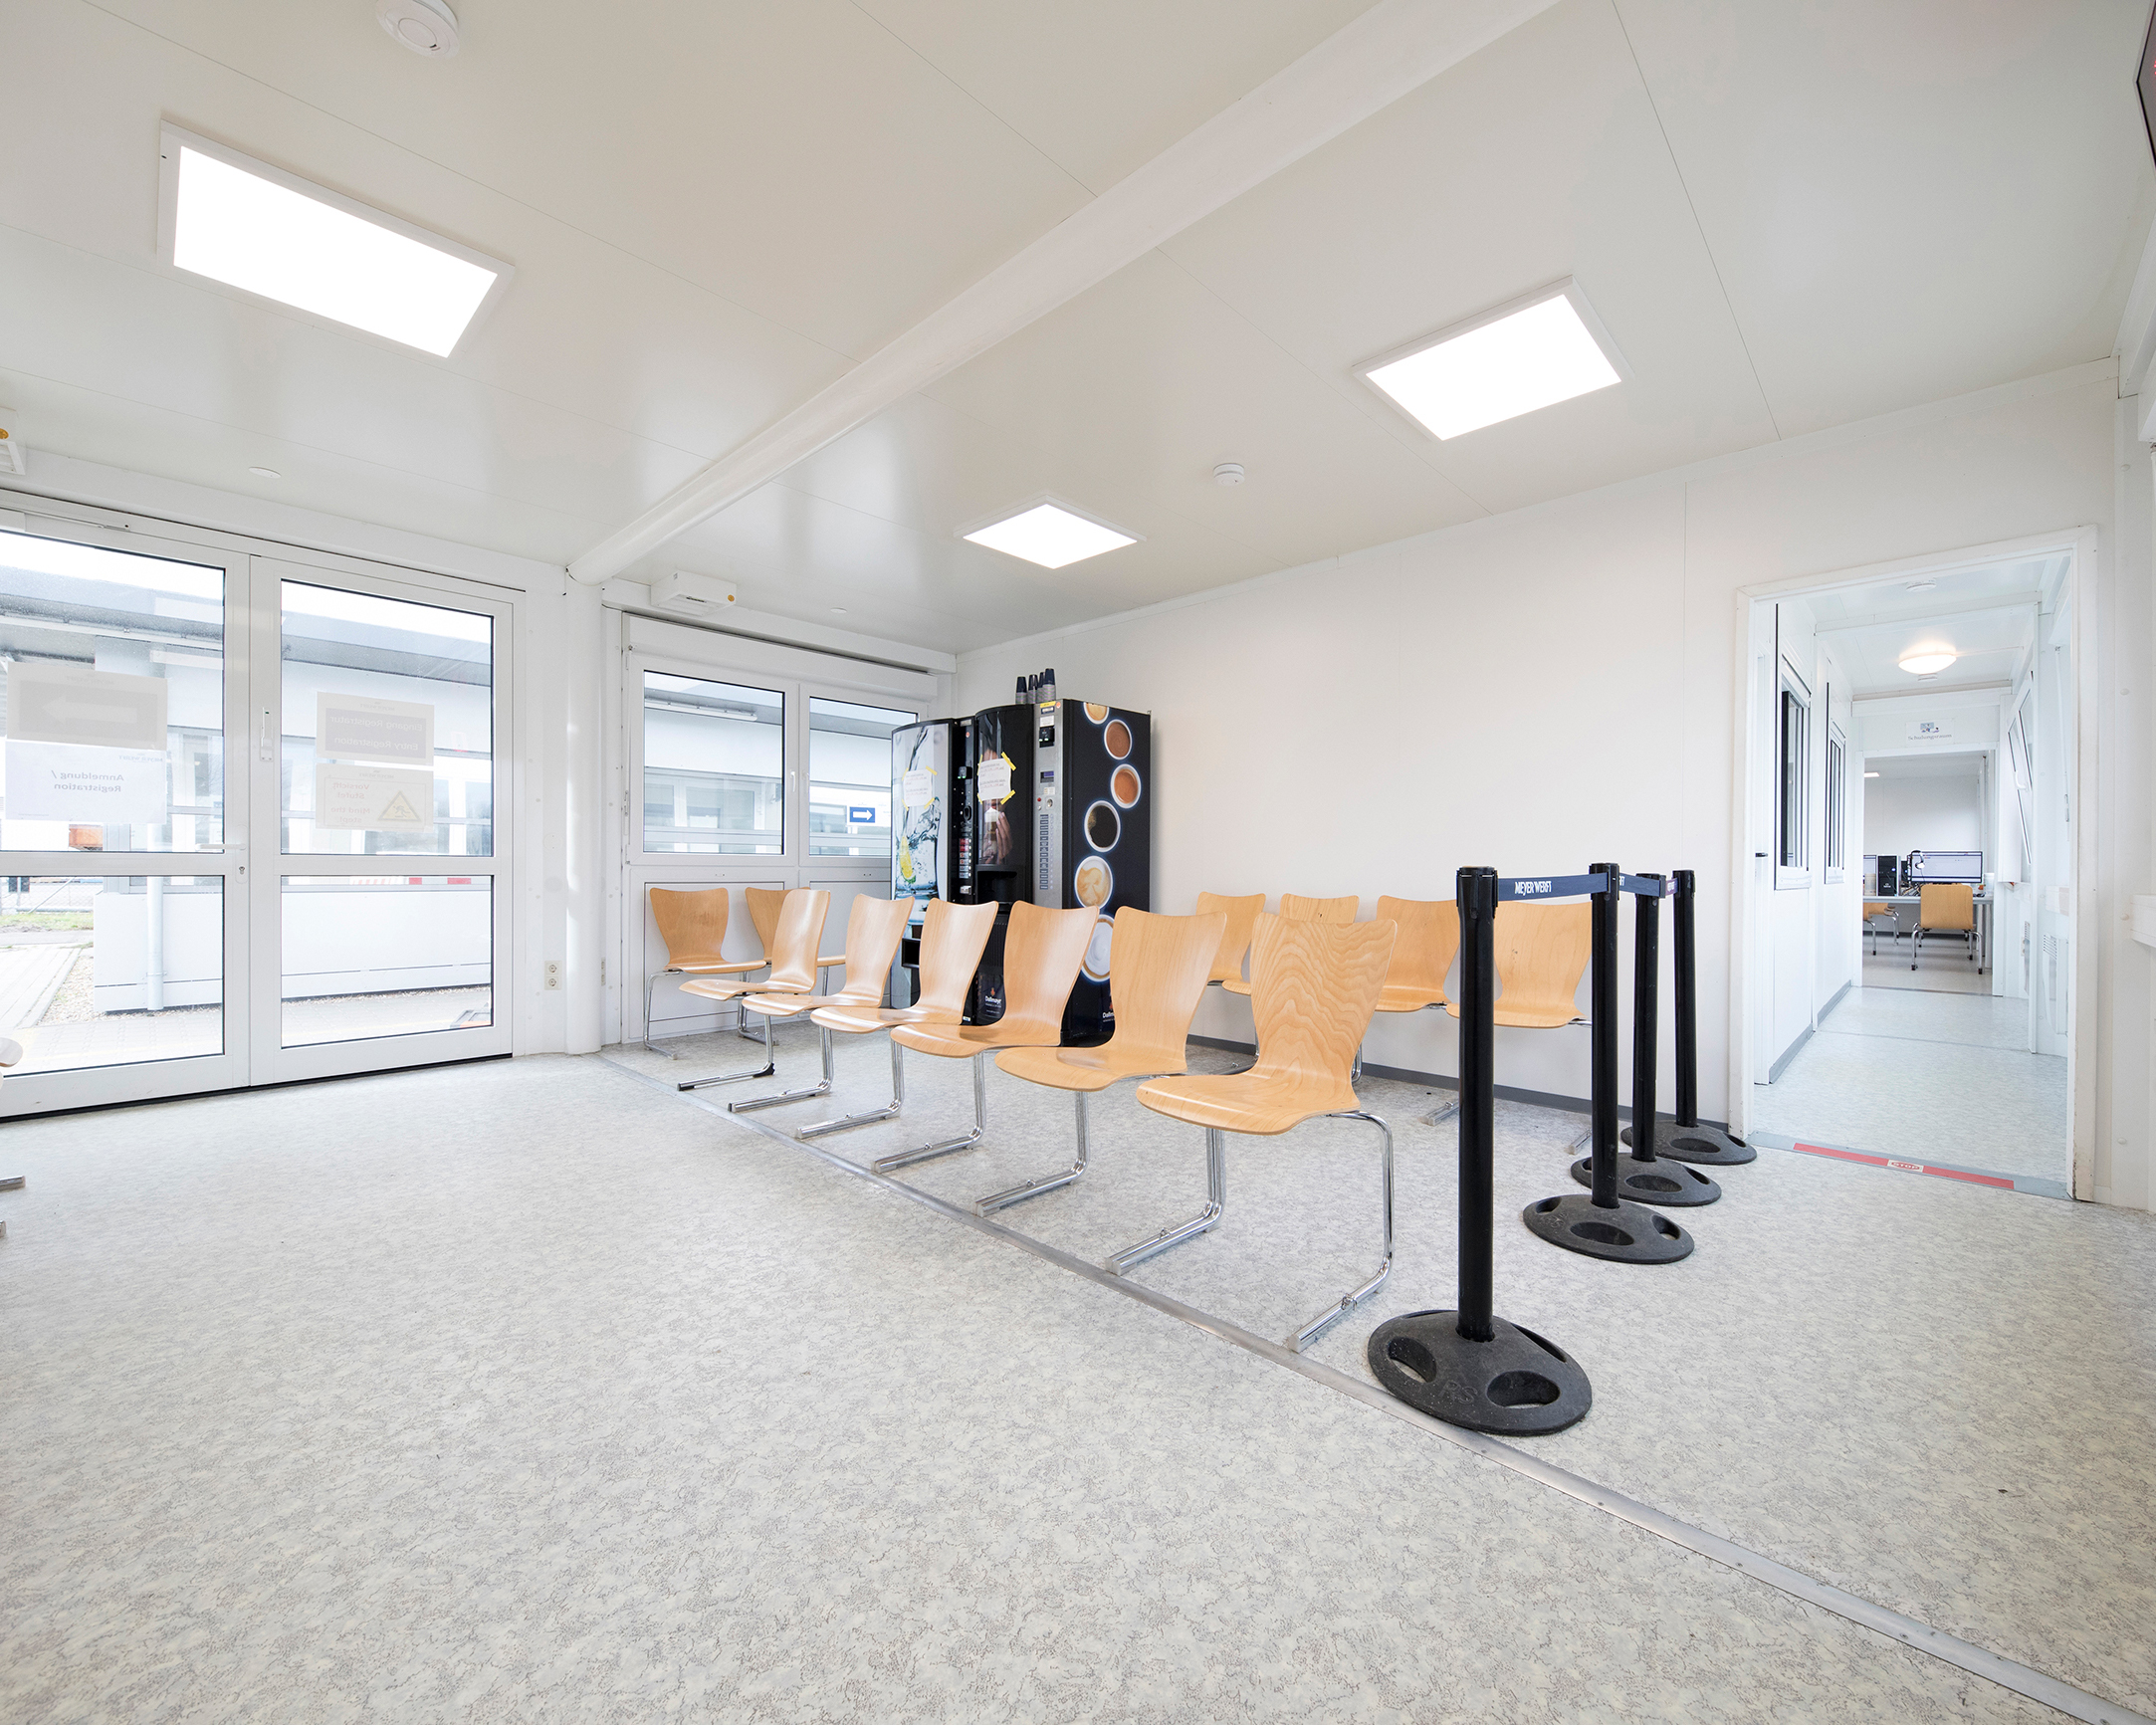 Waiting area and reception of the training centre